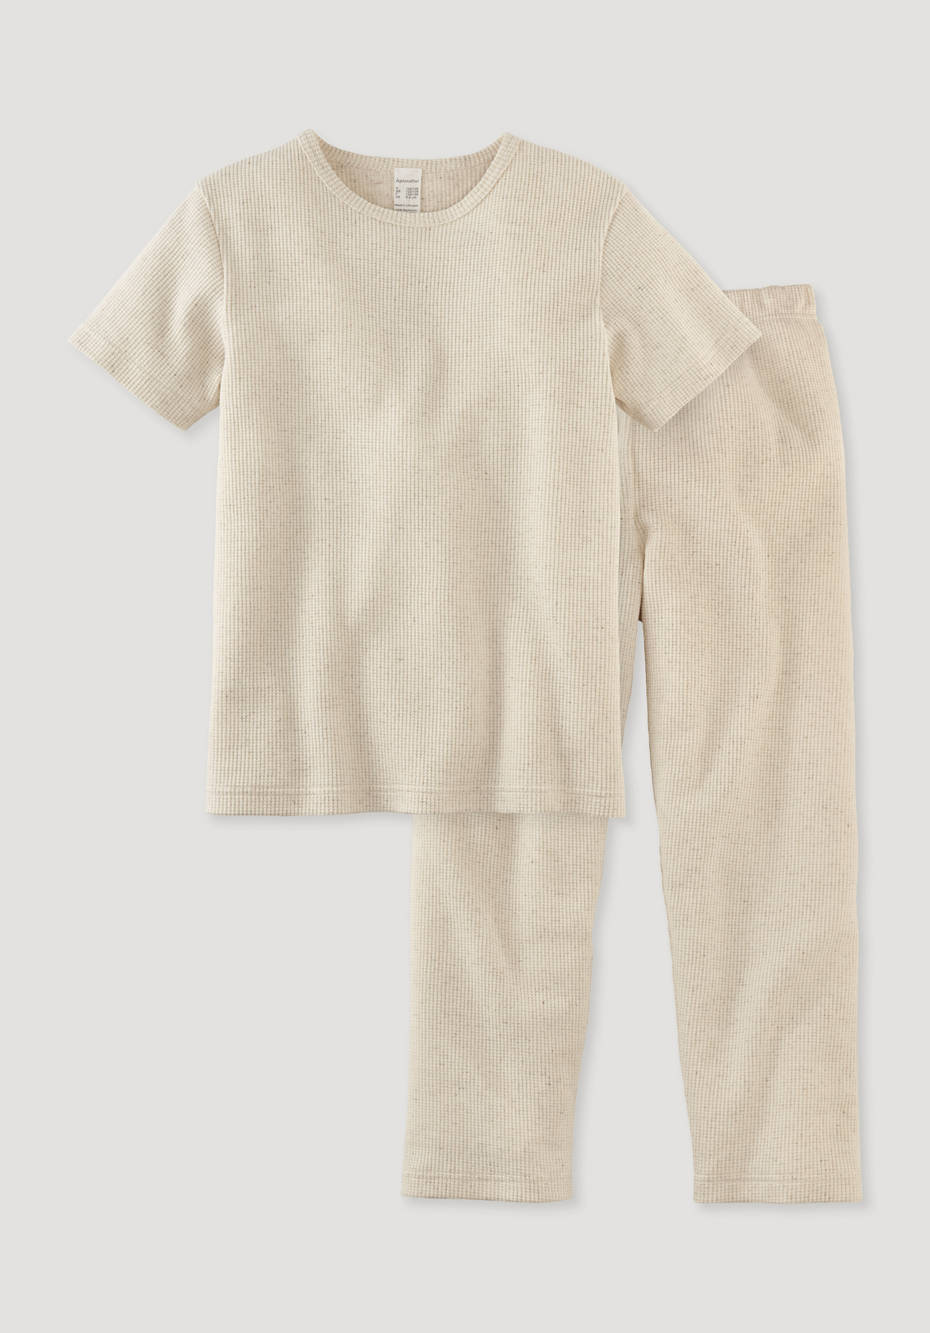 Pajamas made from organic cotton with linen